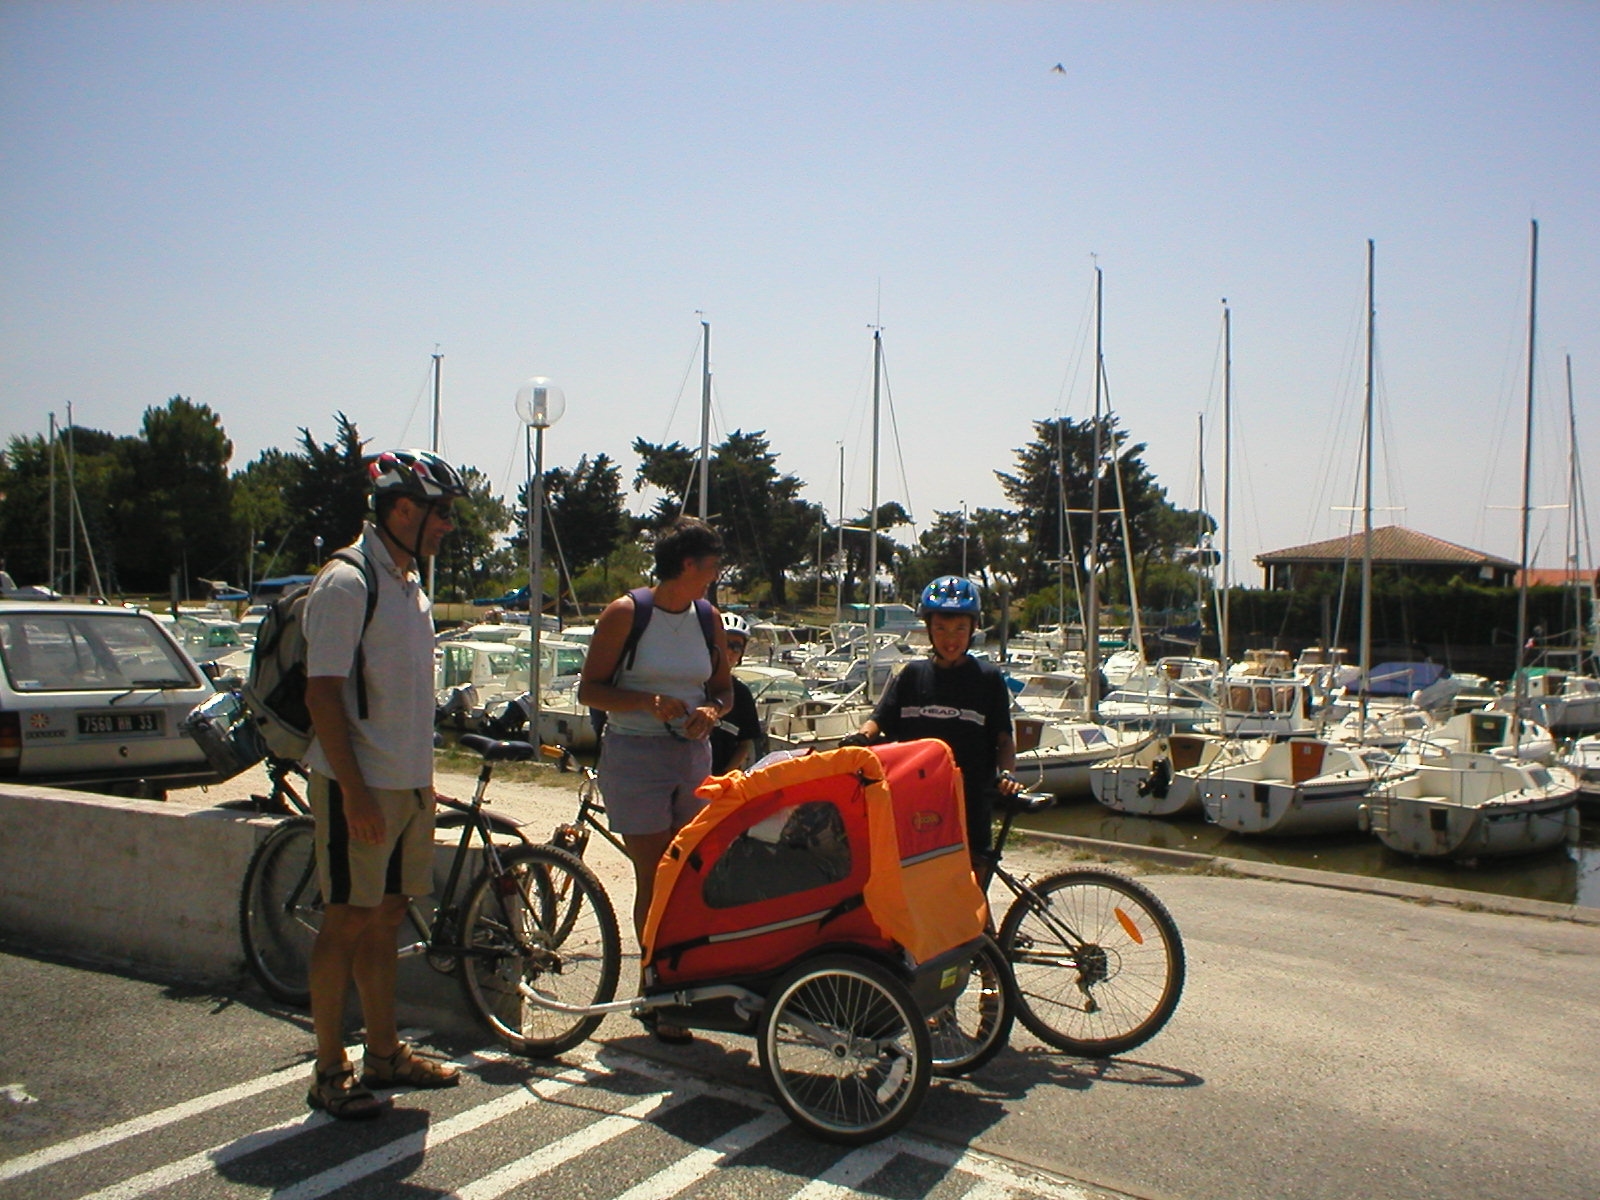 Bordeaux Cycling tour from the vineyard to the ocean and Arcachon